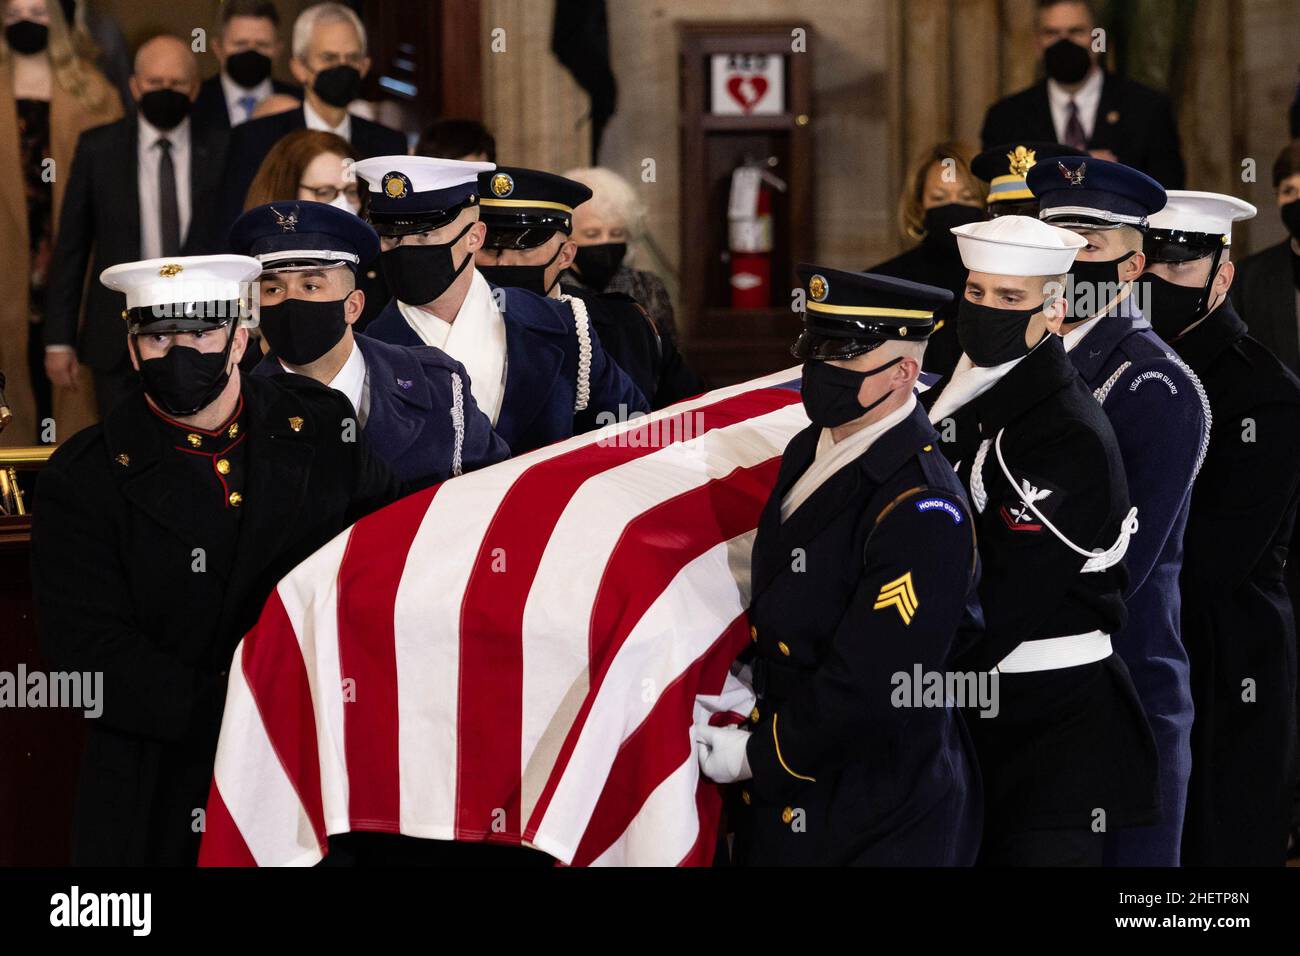 A U.S. Joint Forces bearer team carries the flag-draped casket of former Senate Majority Leader Harry Reid, D-NV, inside the U.S. Capitol where he will lie in state, Wednesday, Jan. 12, 2022, in Washington. Reid, who served five terms in the Senate, will be honored Wednesday in the Capitol Rotunda during a ceremony closed to the public under COVID-19 protocols.Credit: Graeme Jennings/Pool via CNP /MediaPunch Stock Photo